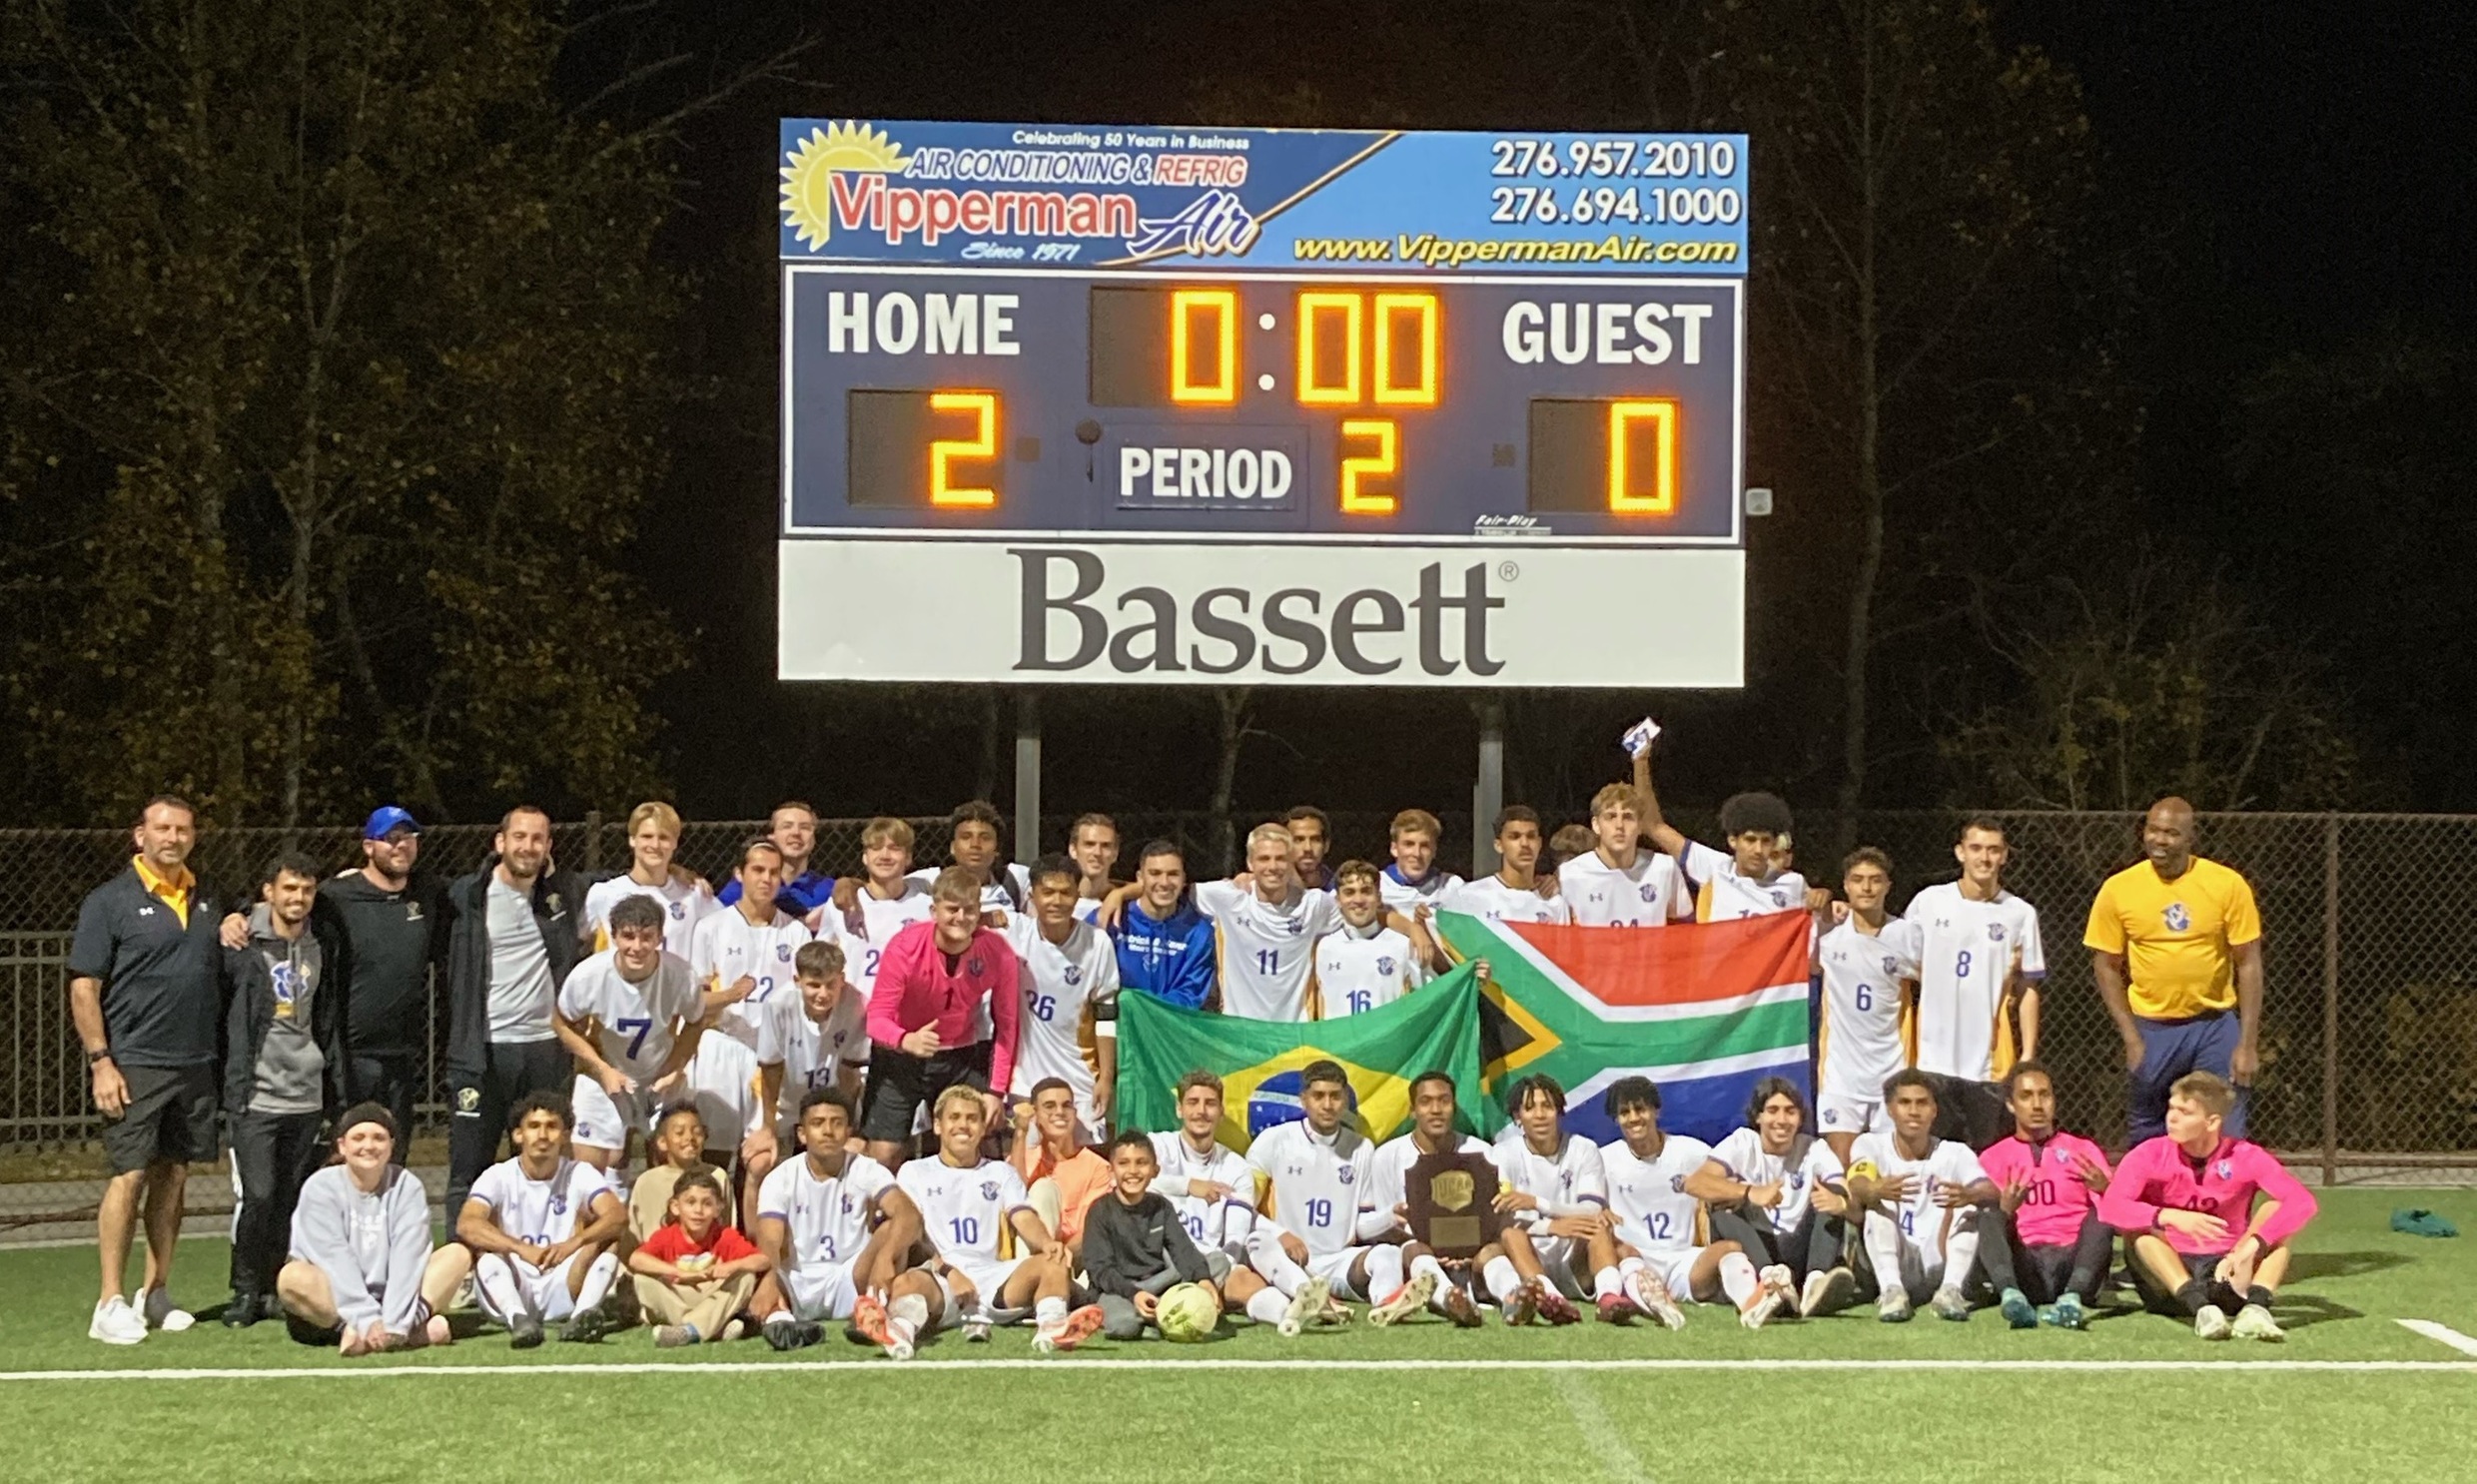 Patrick &amp; Henry wins District punches ticket to DII Soccer National Tournament